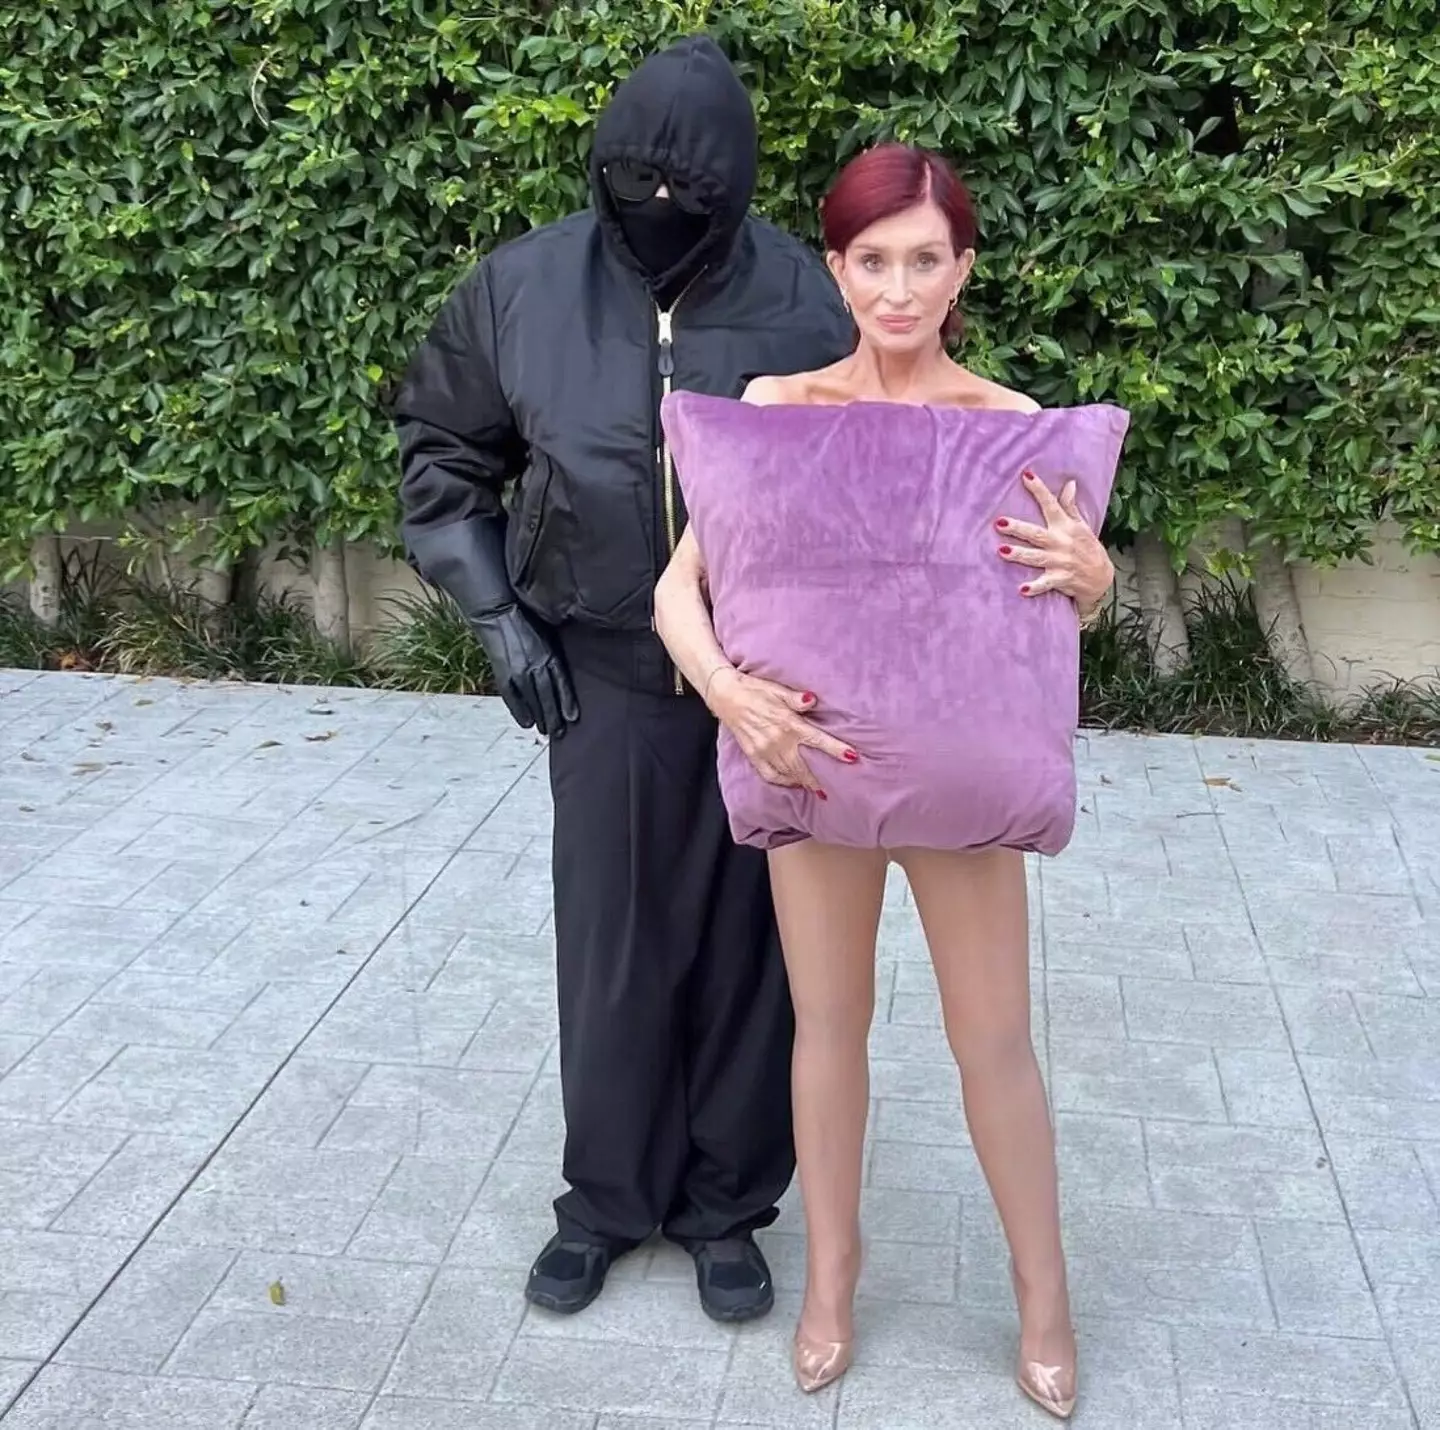 Ozzy and Sharon Osbourne dressed as Kanye West and Bianca Censori.